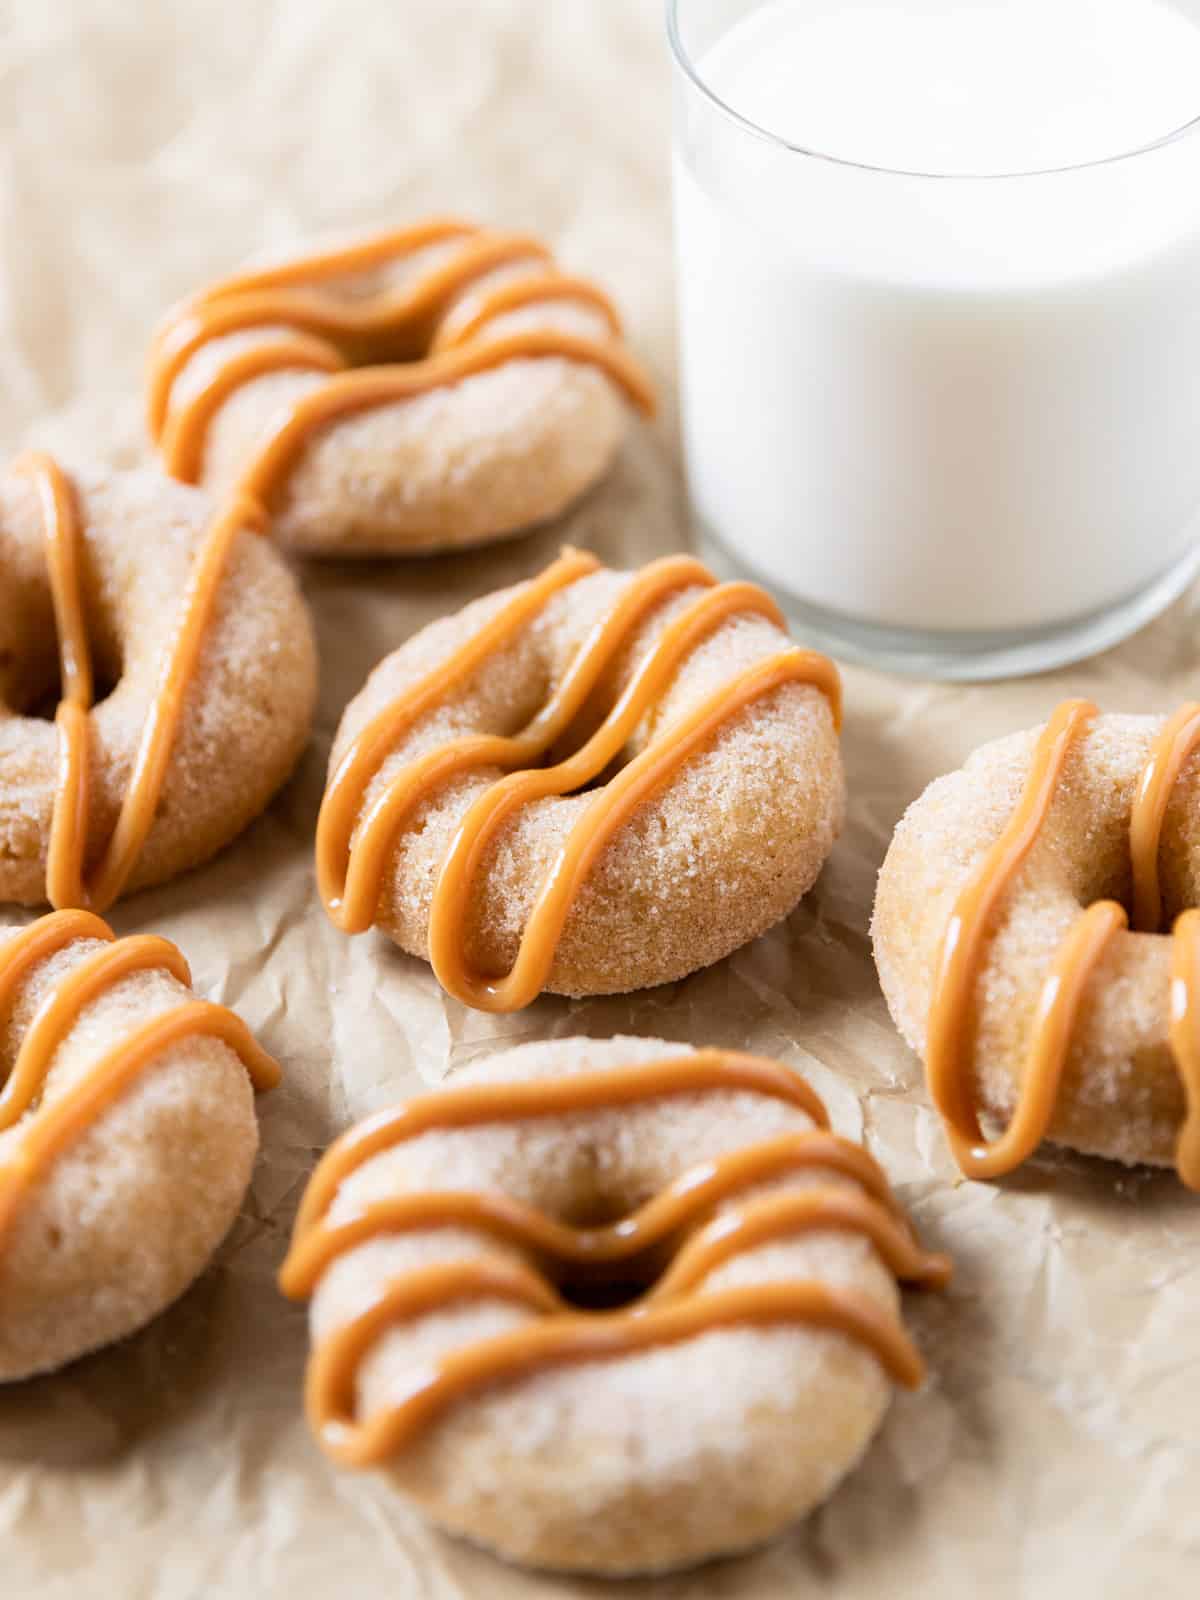 several churro donuts drizzled with dulce de leche on parchment paper with a glass of milk beside them.